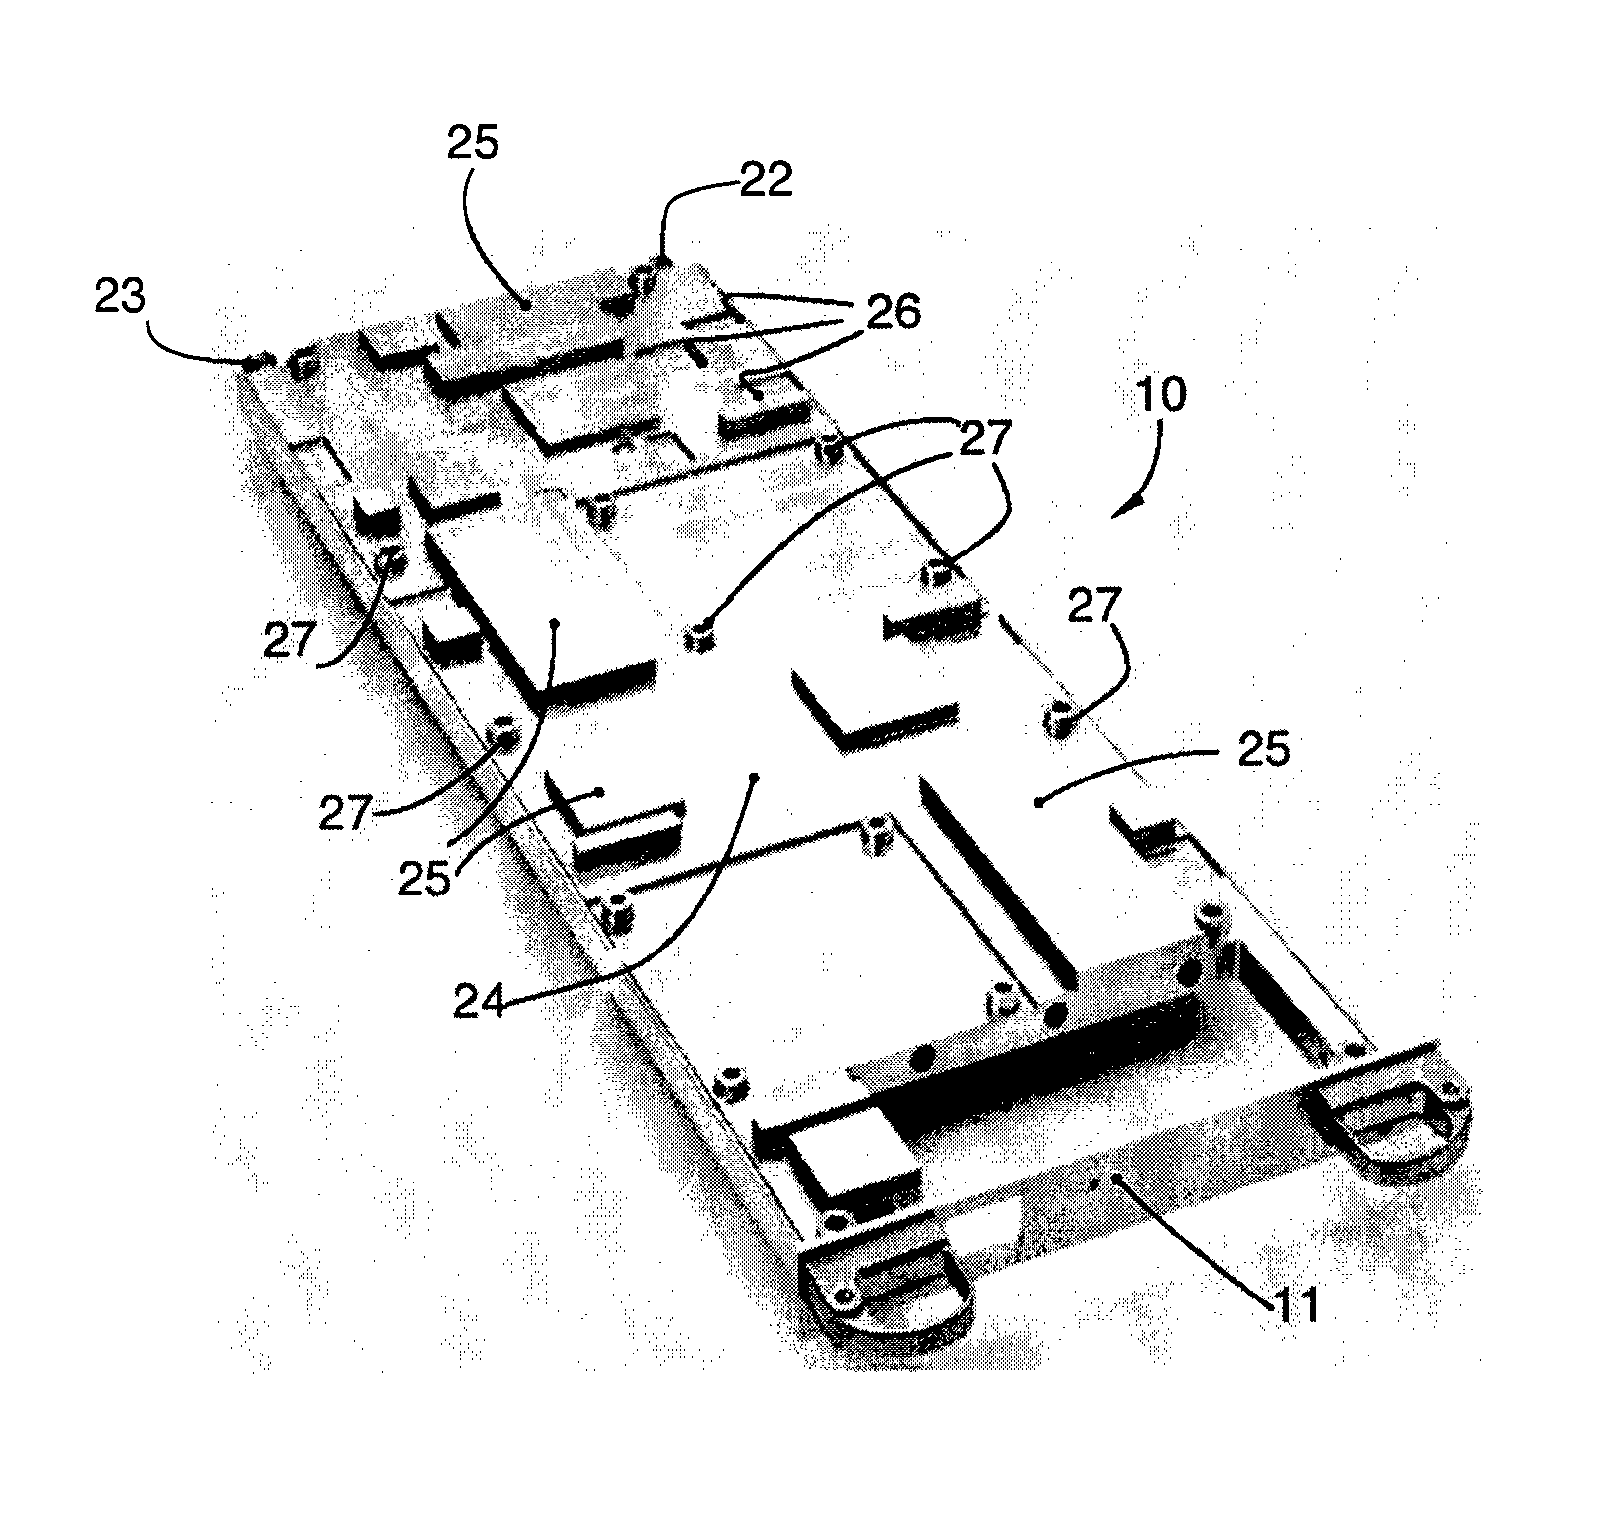 Cooling device with liquid for electronic cards, in particular for high performance processing units